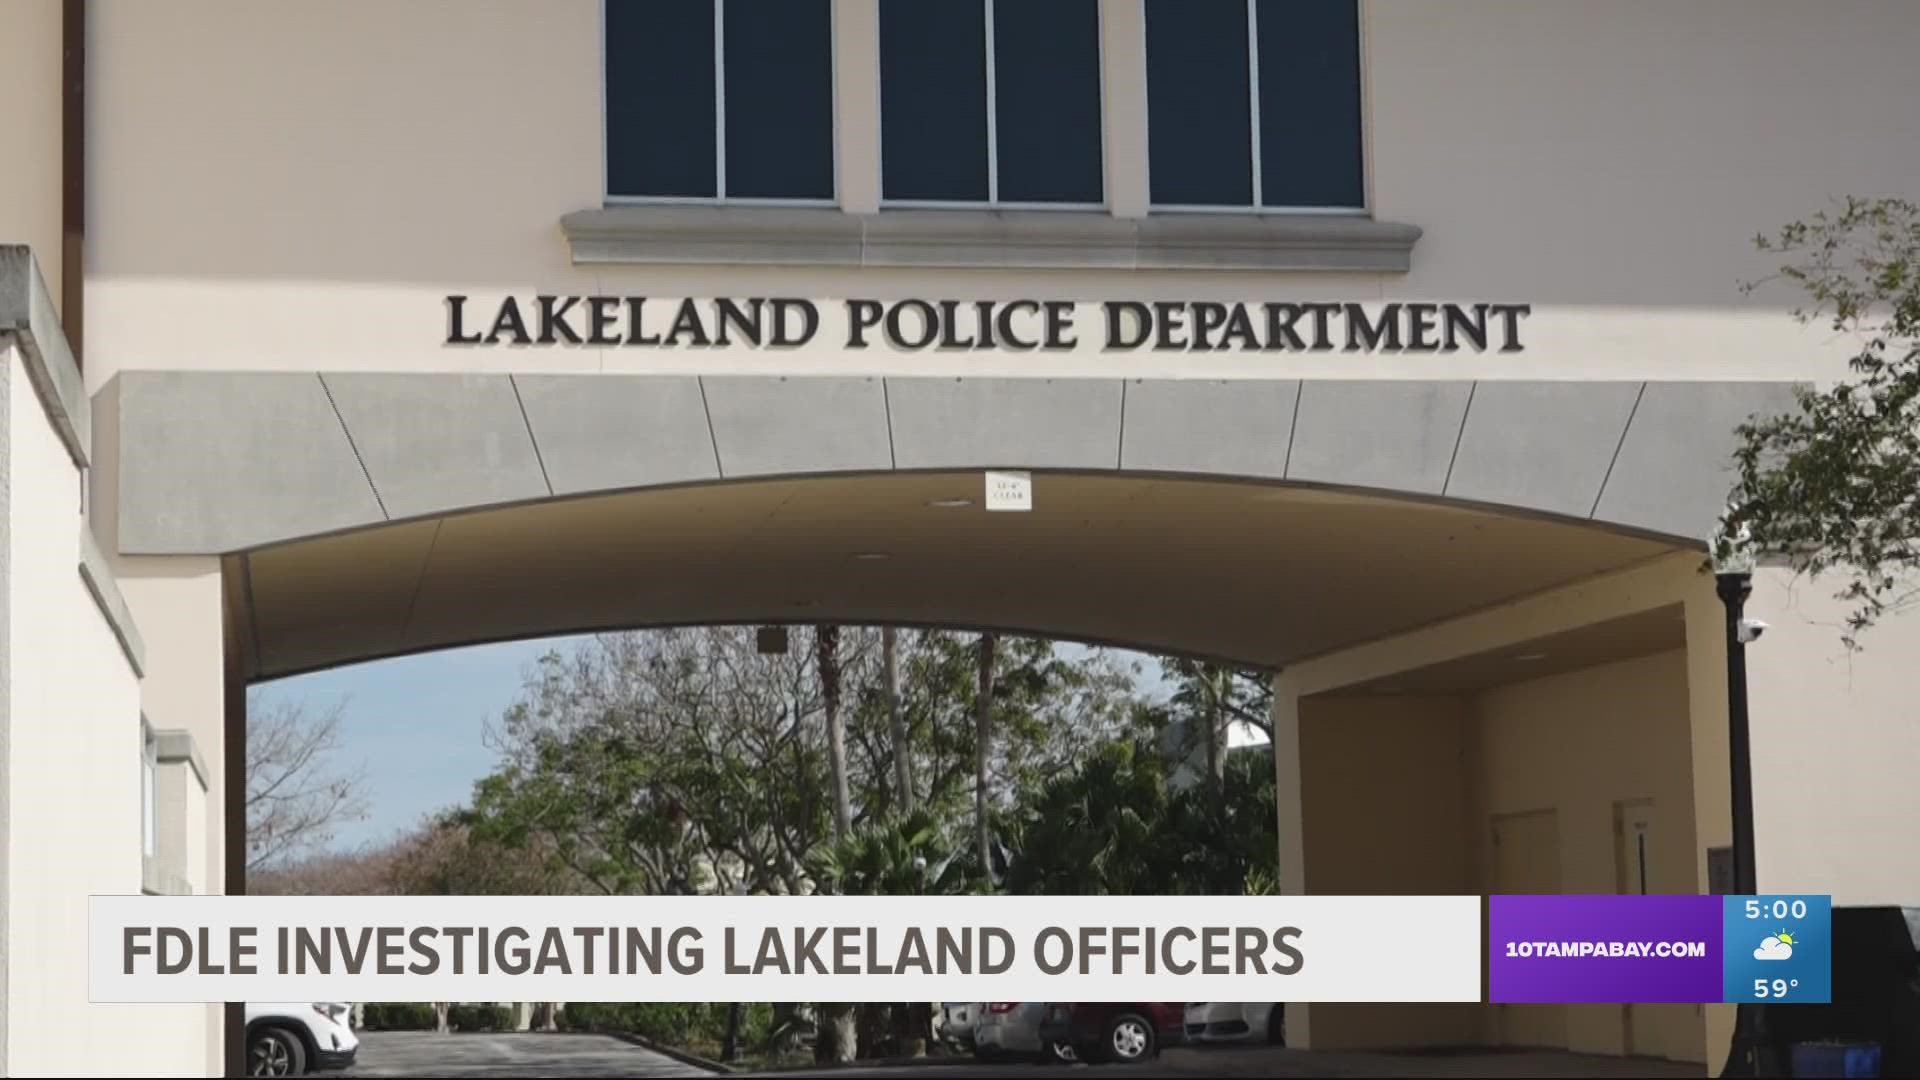 Four officers are being placed on paid administrative leave as the FDLE investigates.